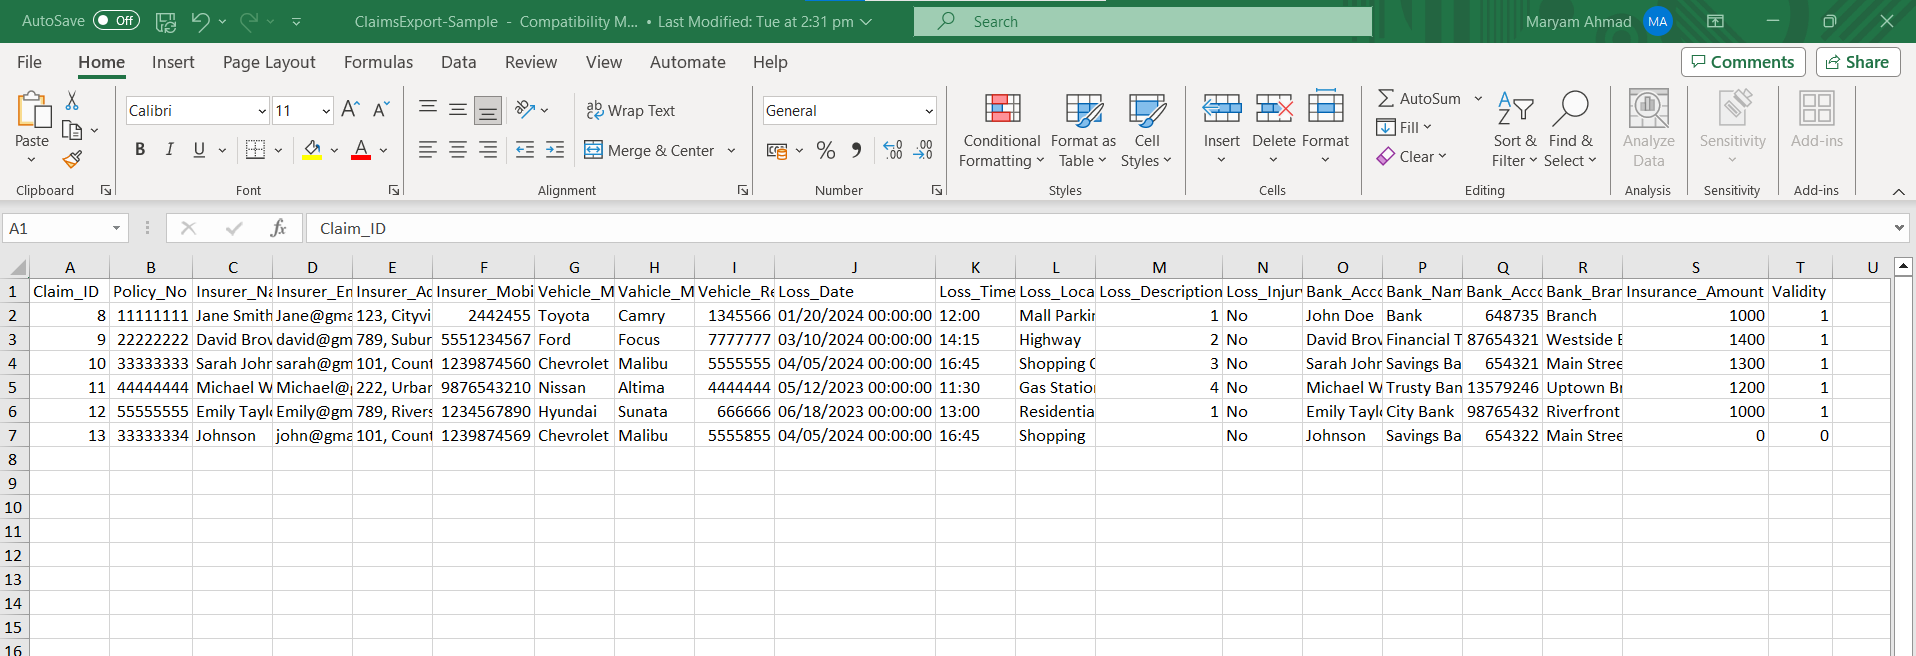 Completely Processed Data in an Excel File 